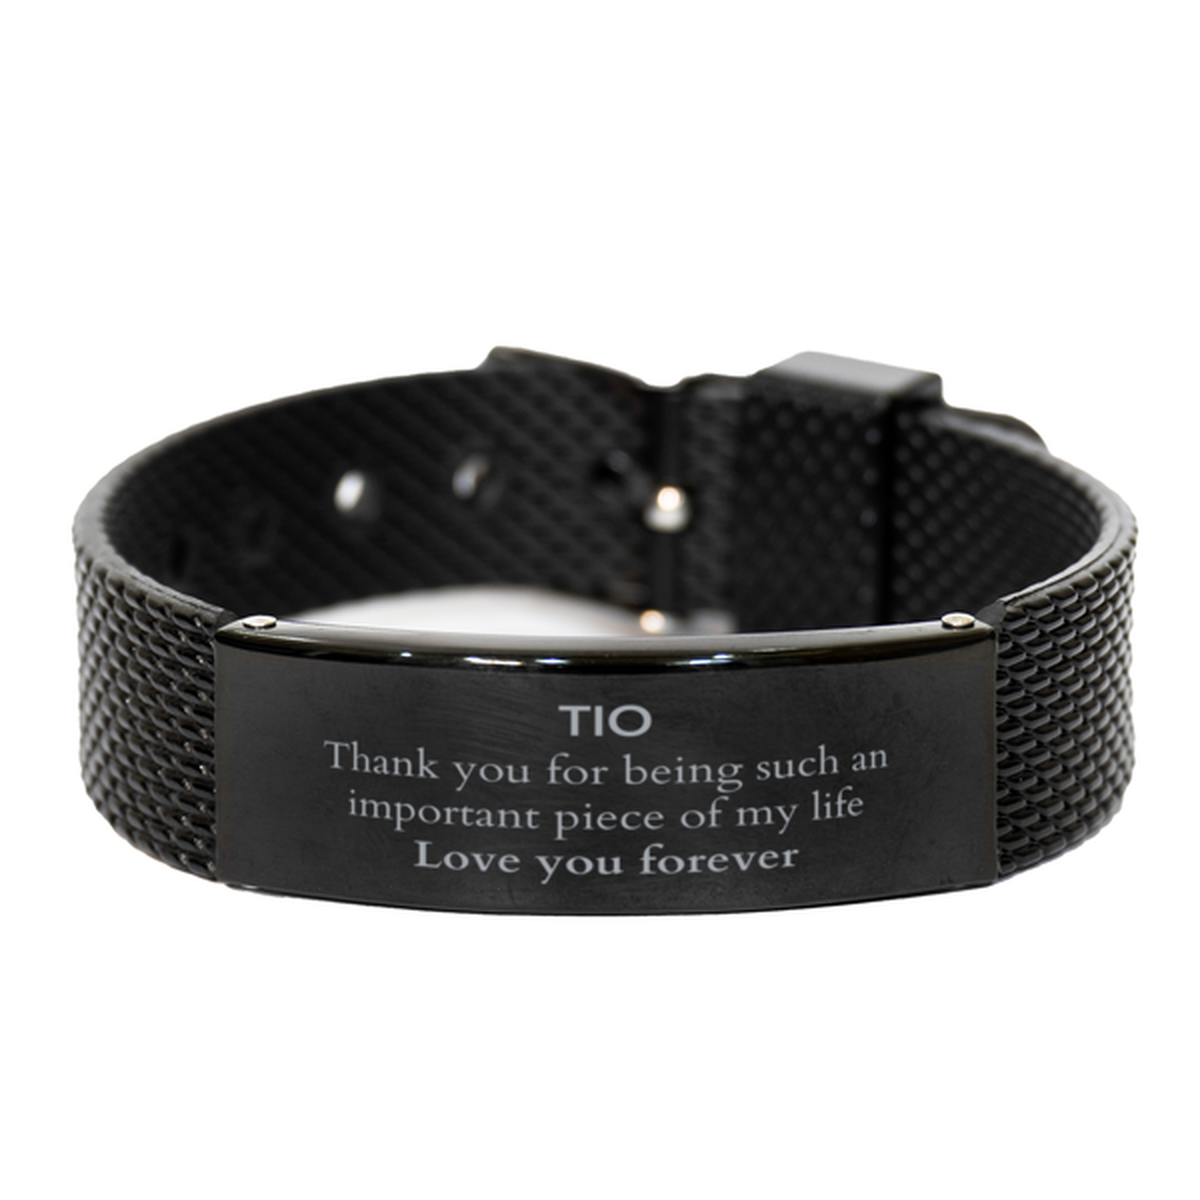 Appropriate Tio Black Shark Mesh Bracelet Epic Birthday Gifts for Tio Thank you for being such an important piece of my life Tio Christmas Mothers Fathers Day